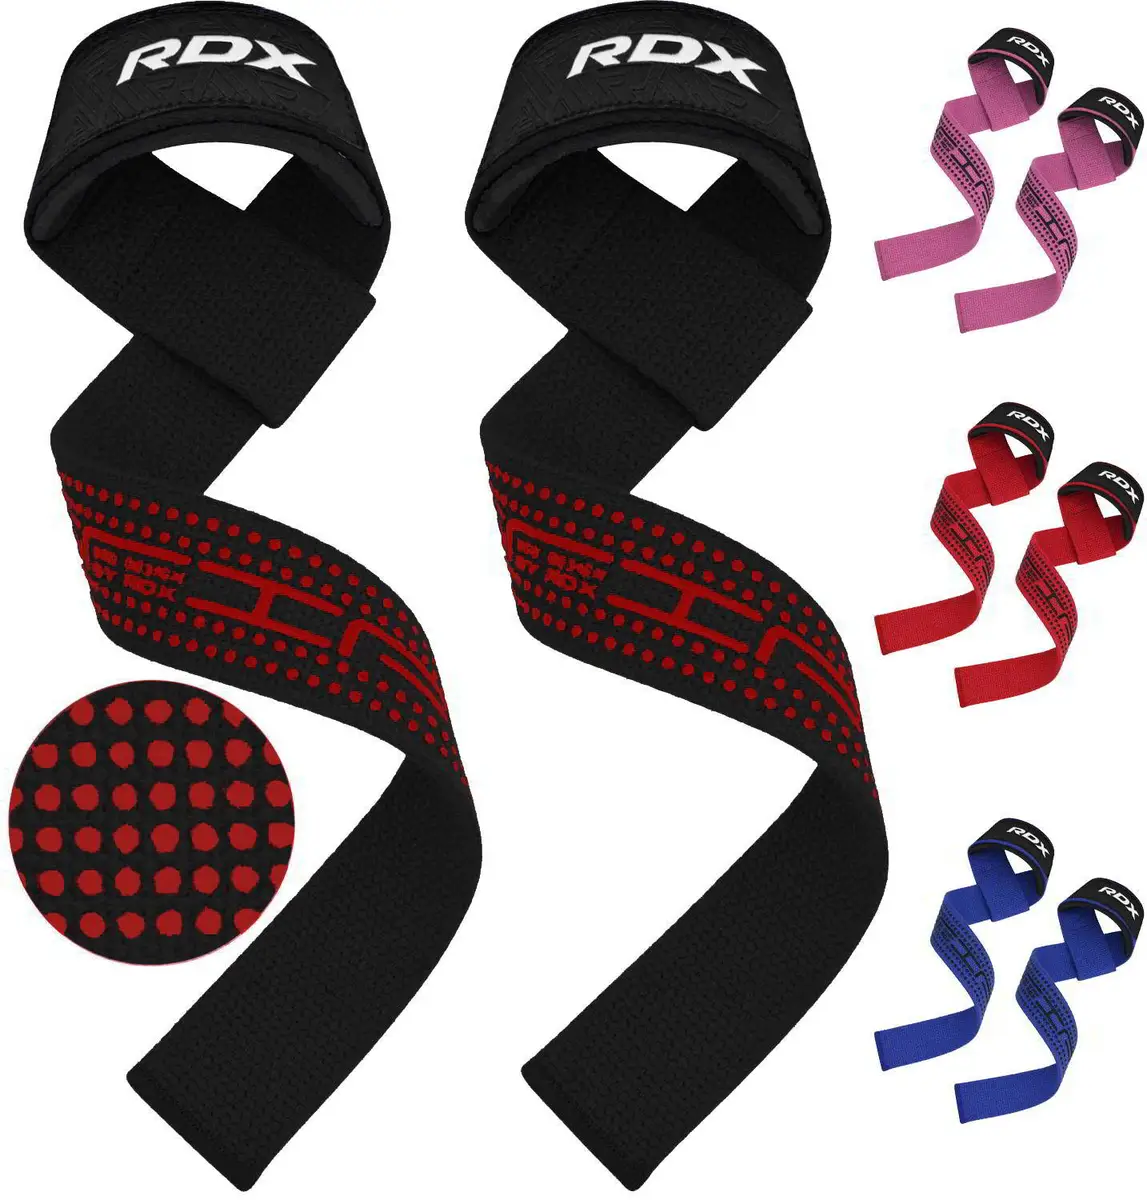 RDX Weight Lifting Grips Training Gym Bar Straps Gloves Wrist Support  Workout